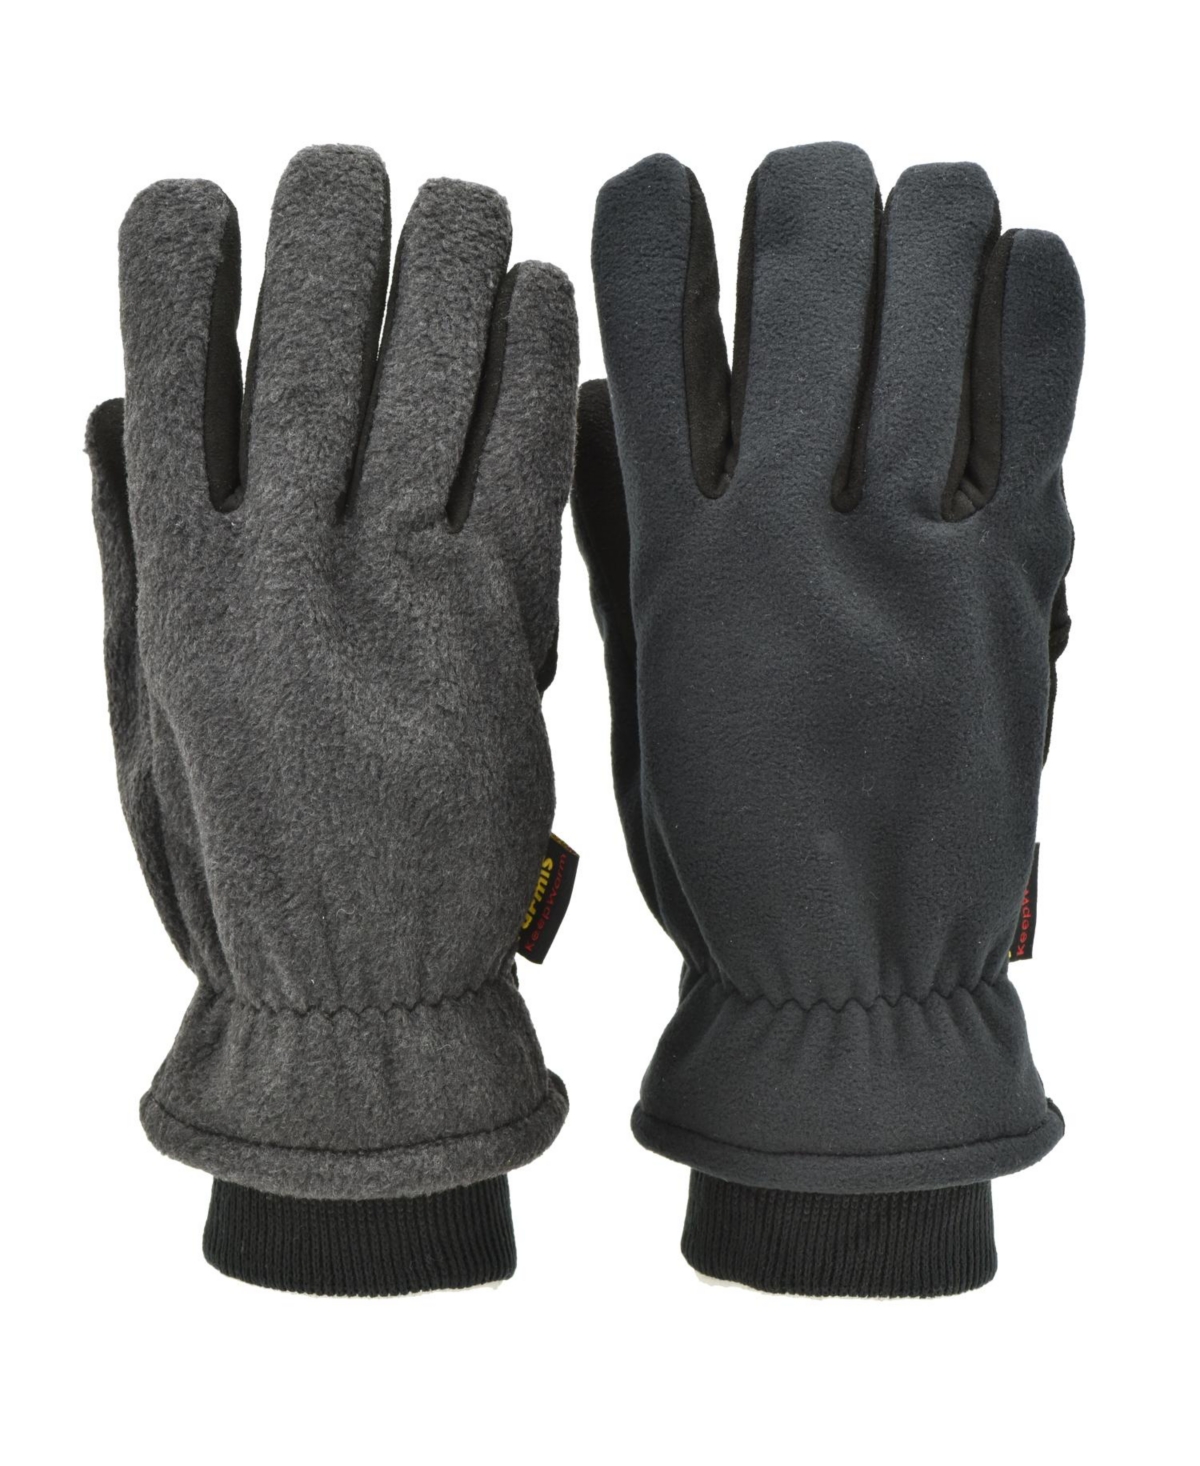 Polar fleece Back and thinsulate lining Winter Outdoor Gloves - Black